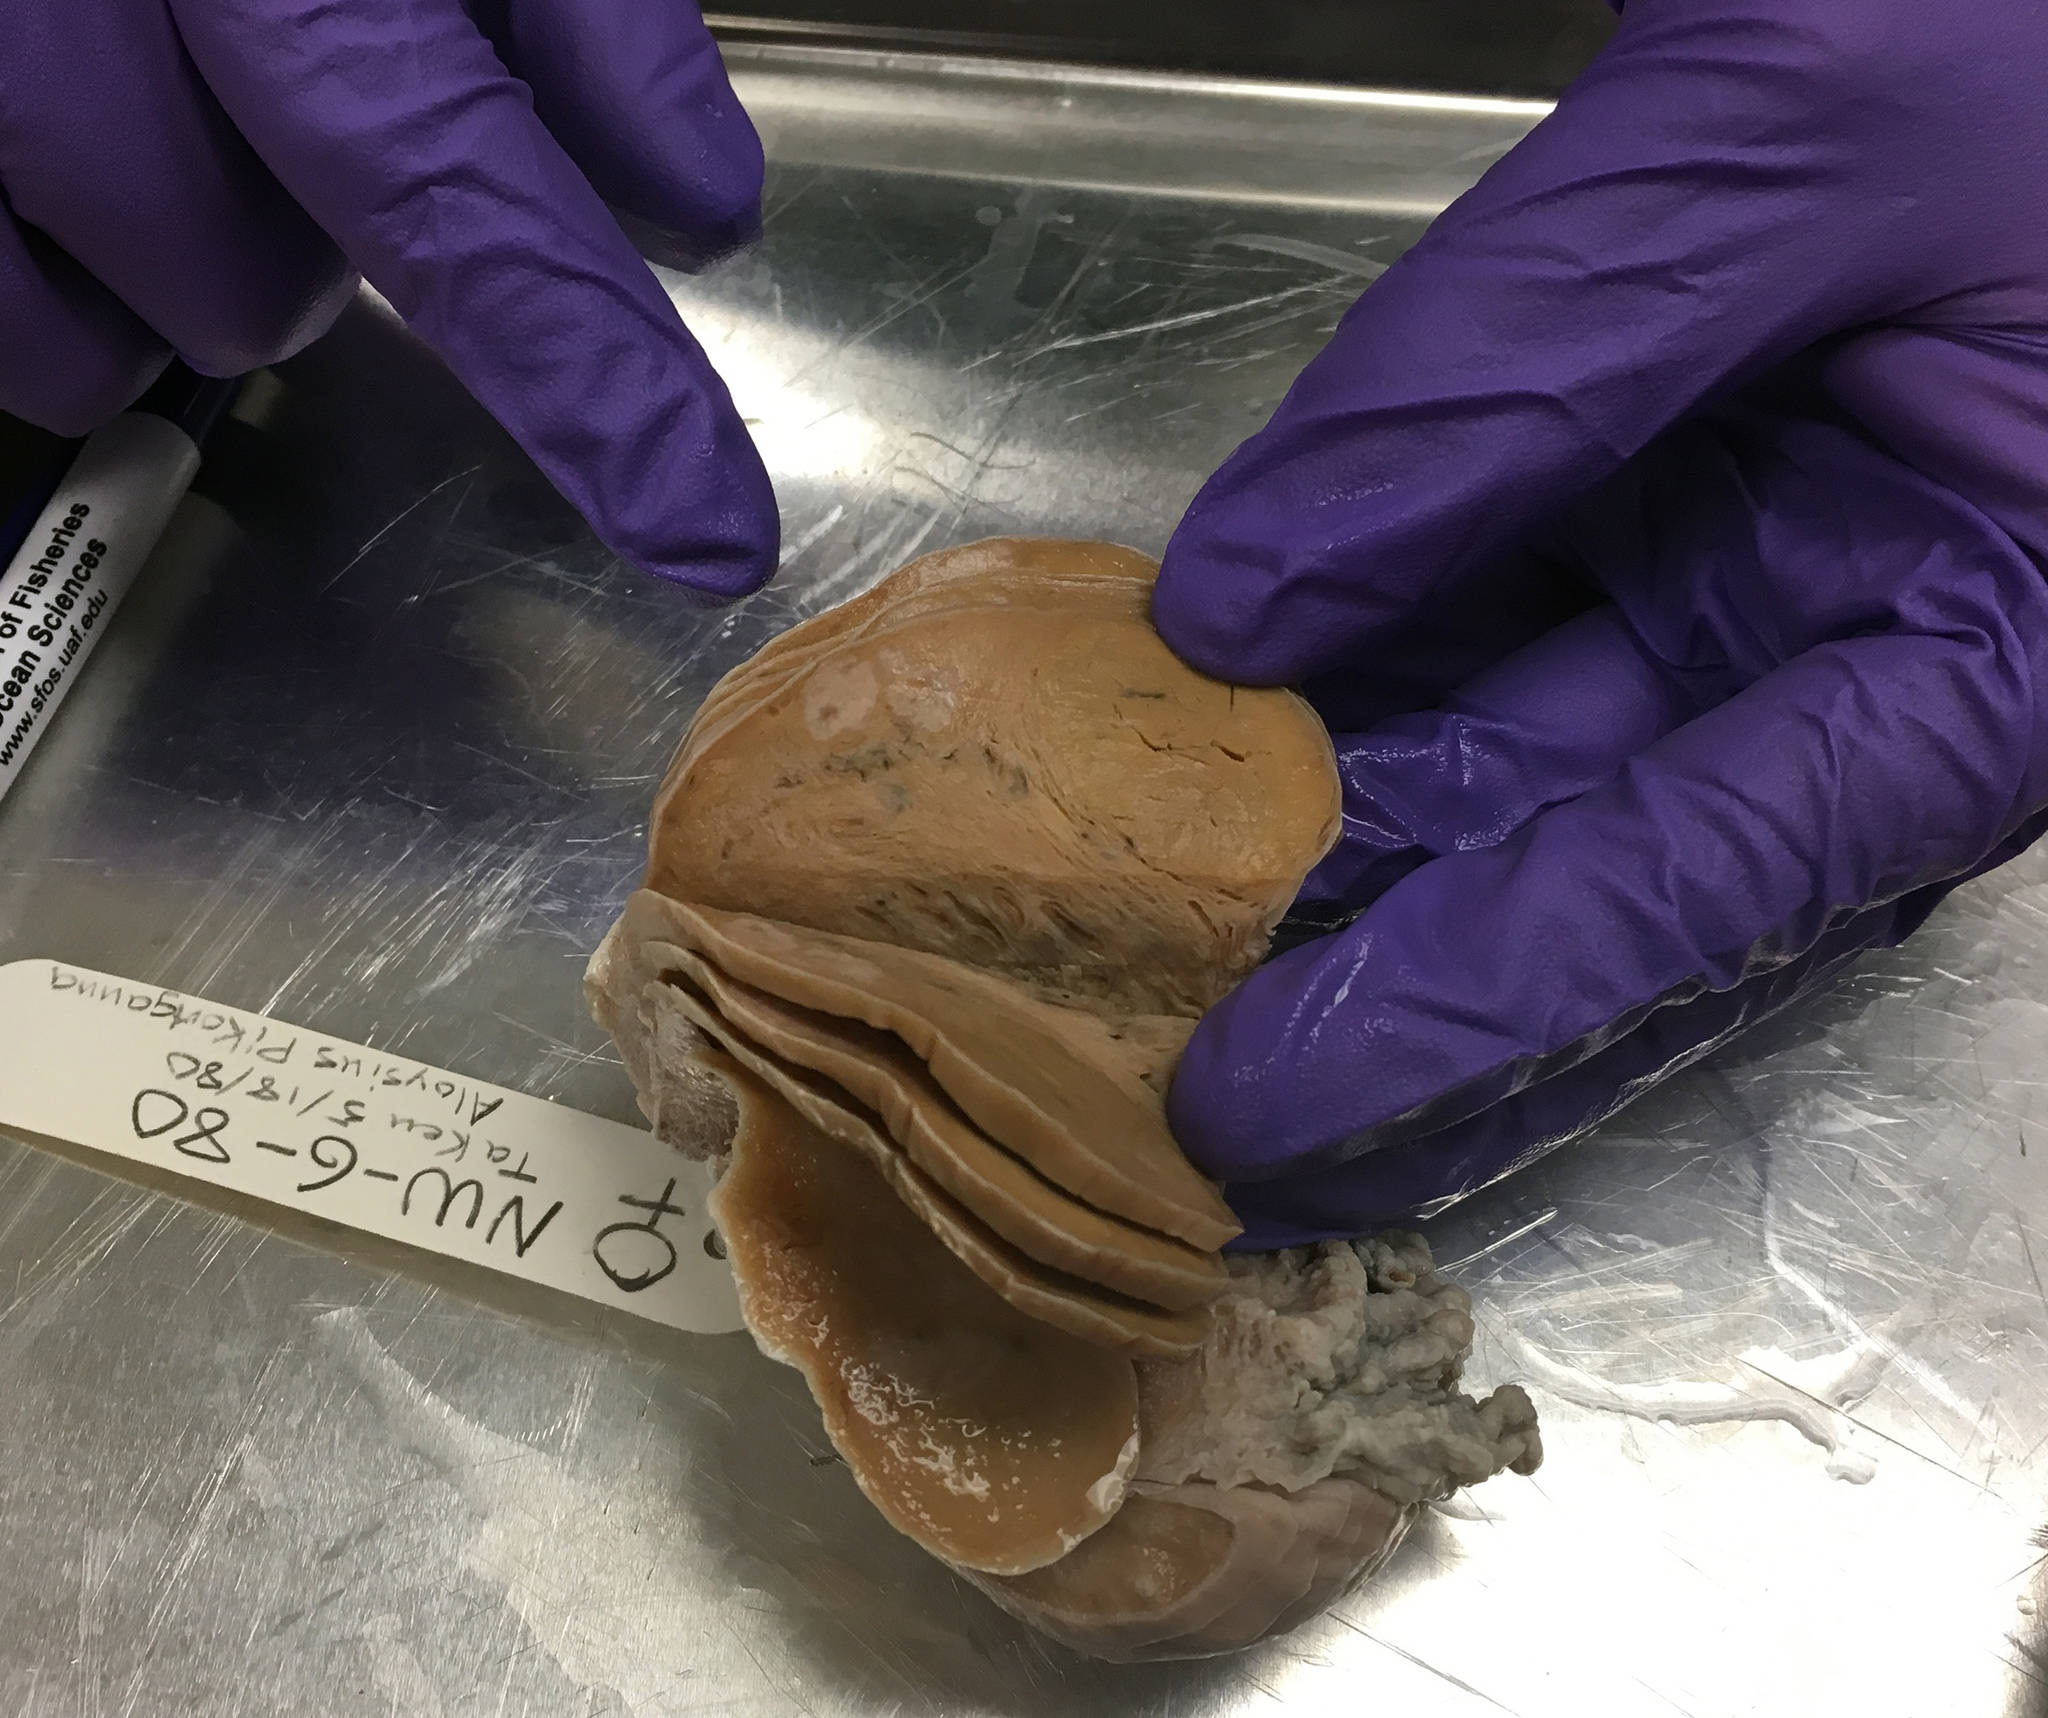 Lara Horstmann points out corpus luteum and corpus albicans in a walrus ovary at a University of Alaska Fairbanks lab. (Courtesy Photo | Casey Clark via the University of Alaska Fairbanks)